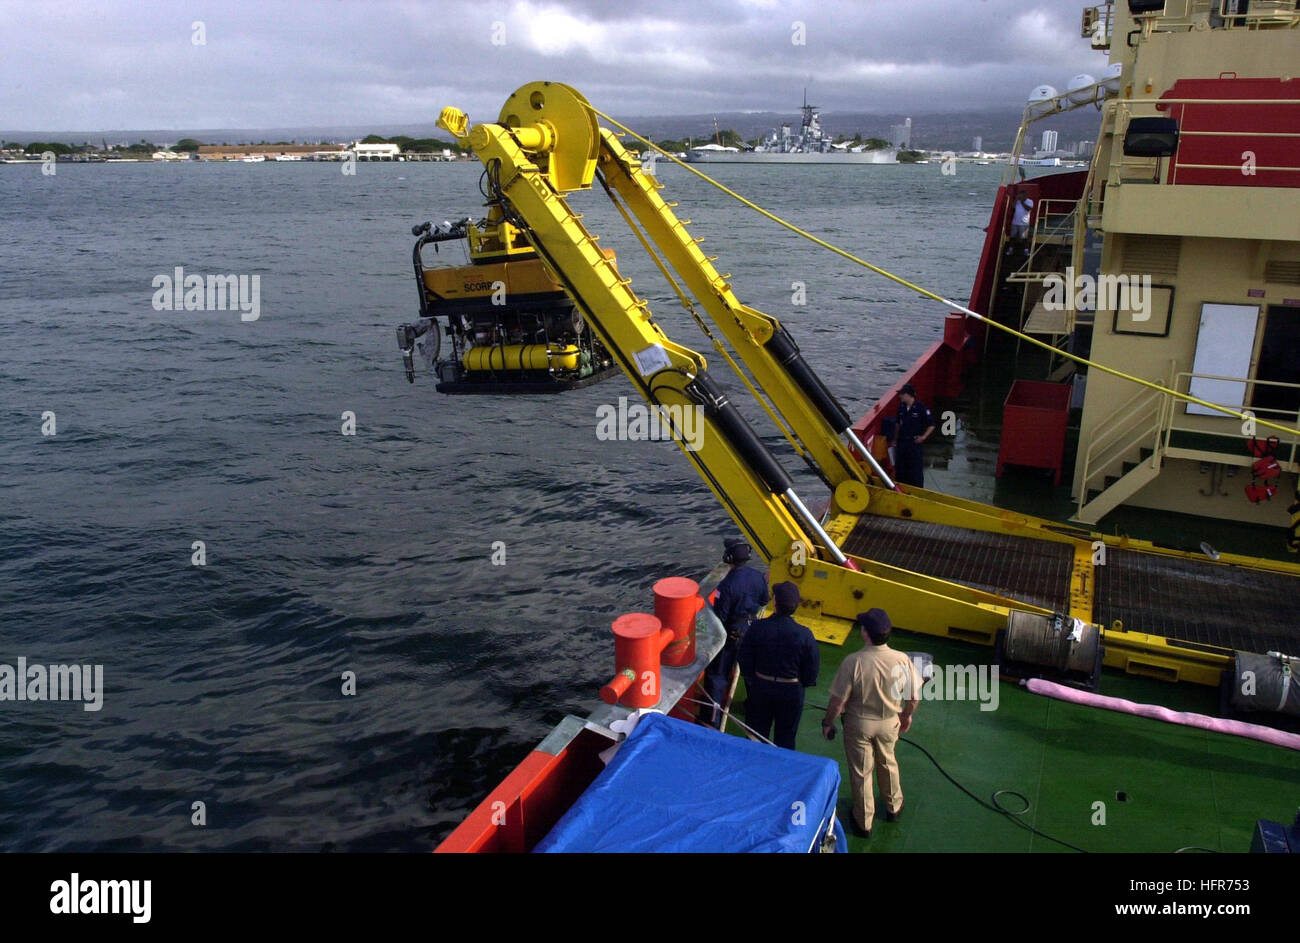 050805-N-0000X-001 U.S. Navy file photo  (February 15, 2001)  --  The remotely operated vehicle (ROV) 'Scorpio Two' is lowered to the water to conduct an operational test dive from aboard the MSC ship Edison Chouest.  Scorpio Two will conduct video surveys of the sunken Japanese fishing vessel Ehime Maru that was involved in a Feb. 9 collision at sea with the Los Angeles Class attack submarine USS Greeneville (SSN 772) approximately 9 miles of the coast of Diamond Head, Hawaii.  U.S. Navy photo by Photographer's Mate 1st Class Gregory Messier. (RELEASED) US Navy 050805-N-0000X-001 U.S. Navy fi Stock Photo